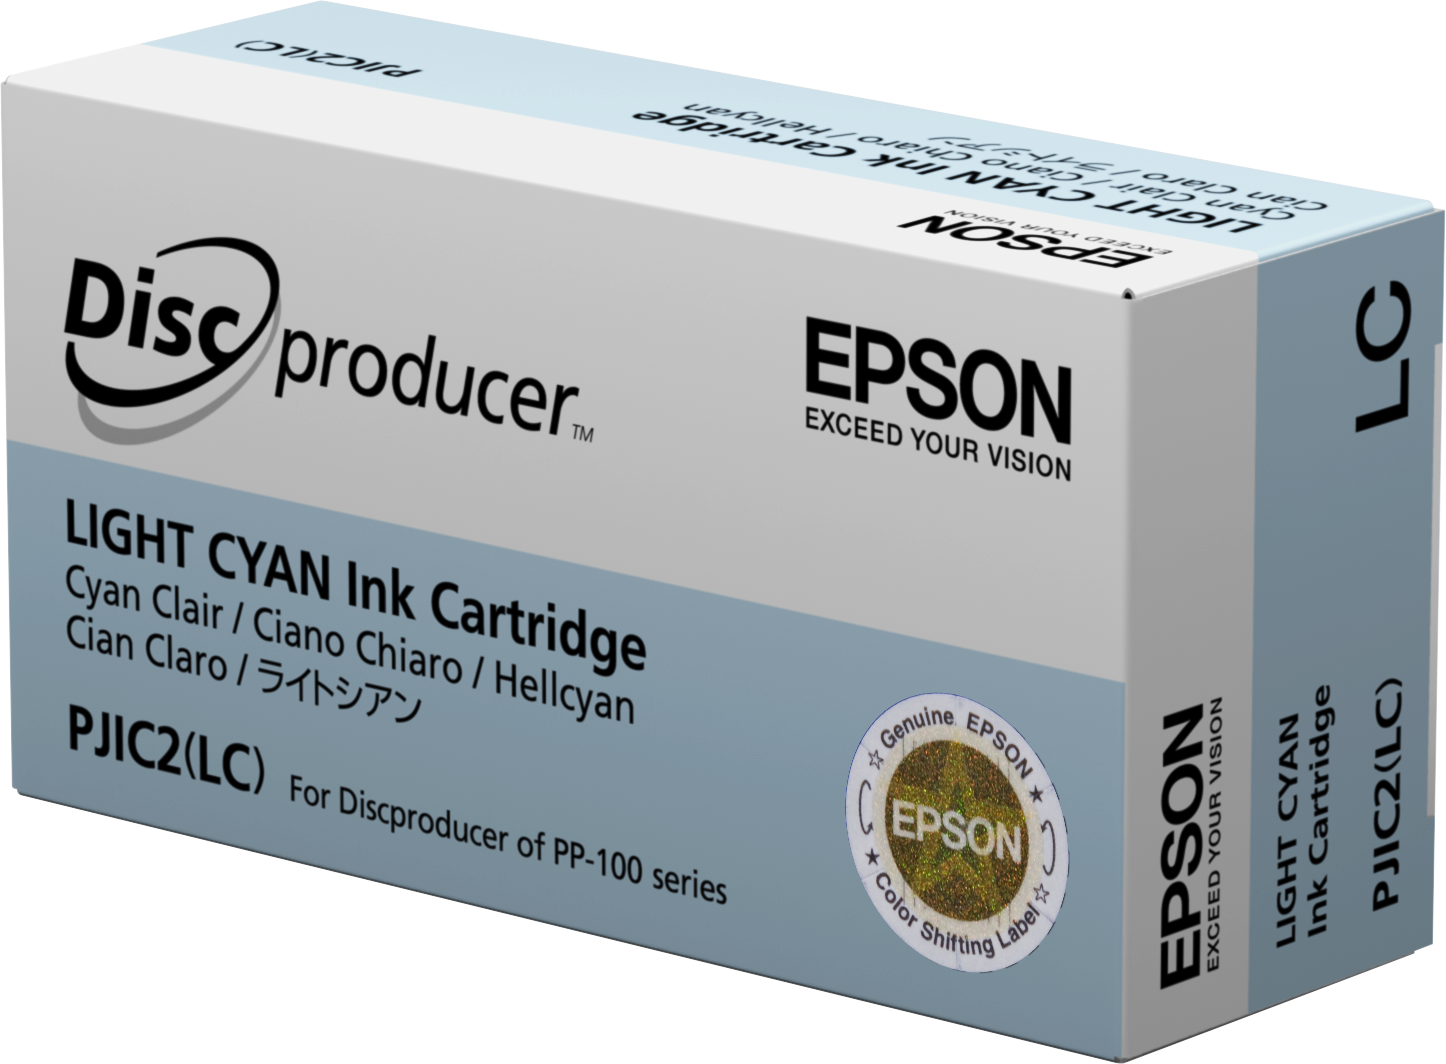 Epson Discproducer Ink PJIC7(LC), Light Cyan